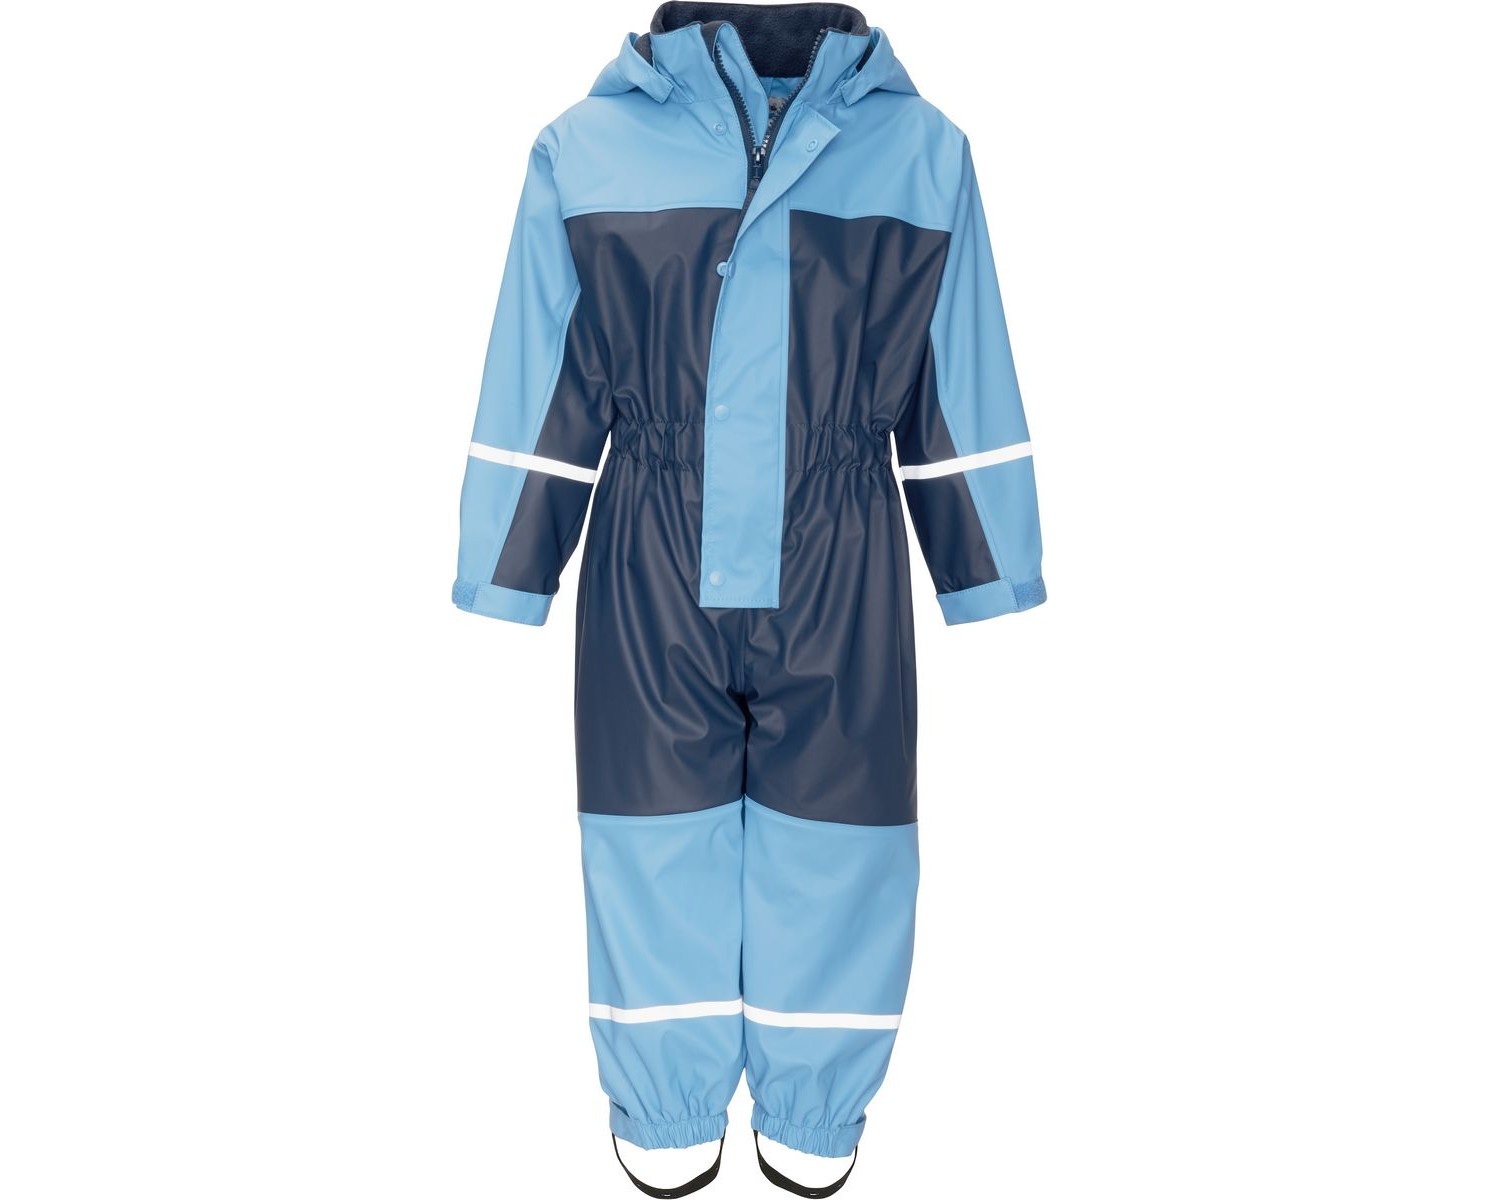 Playshoes Overall Basic Mit Fleecefutter Chaqueta Impermeable para Niños 